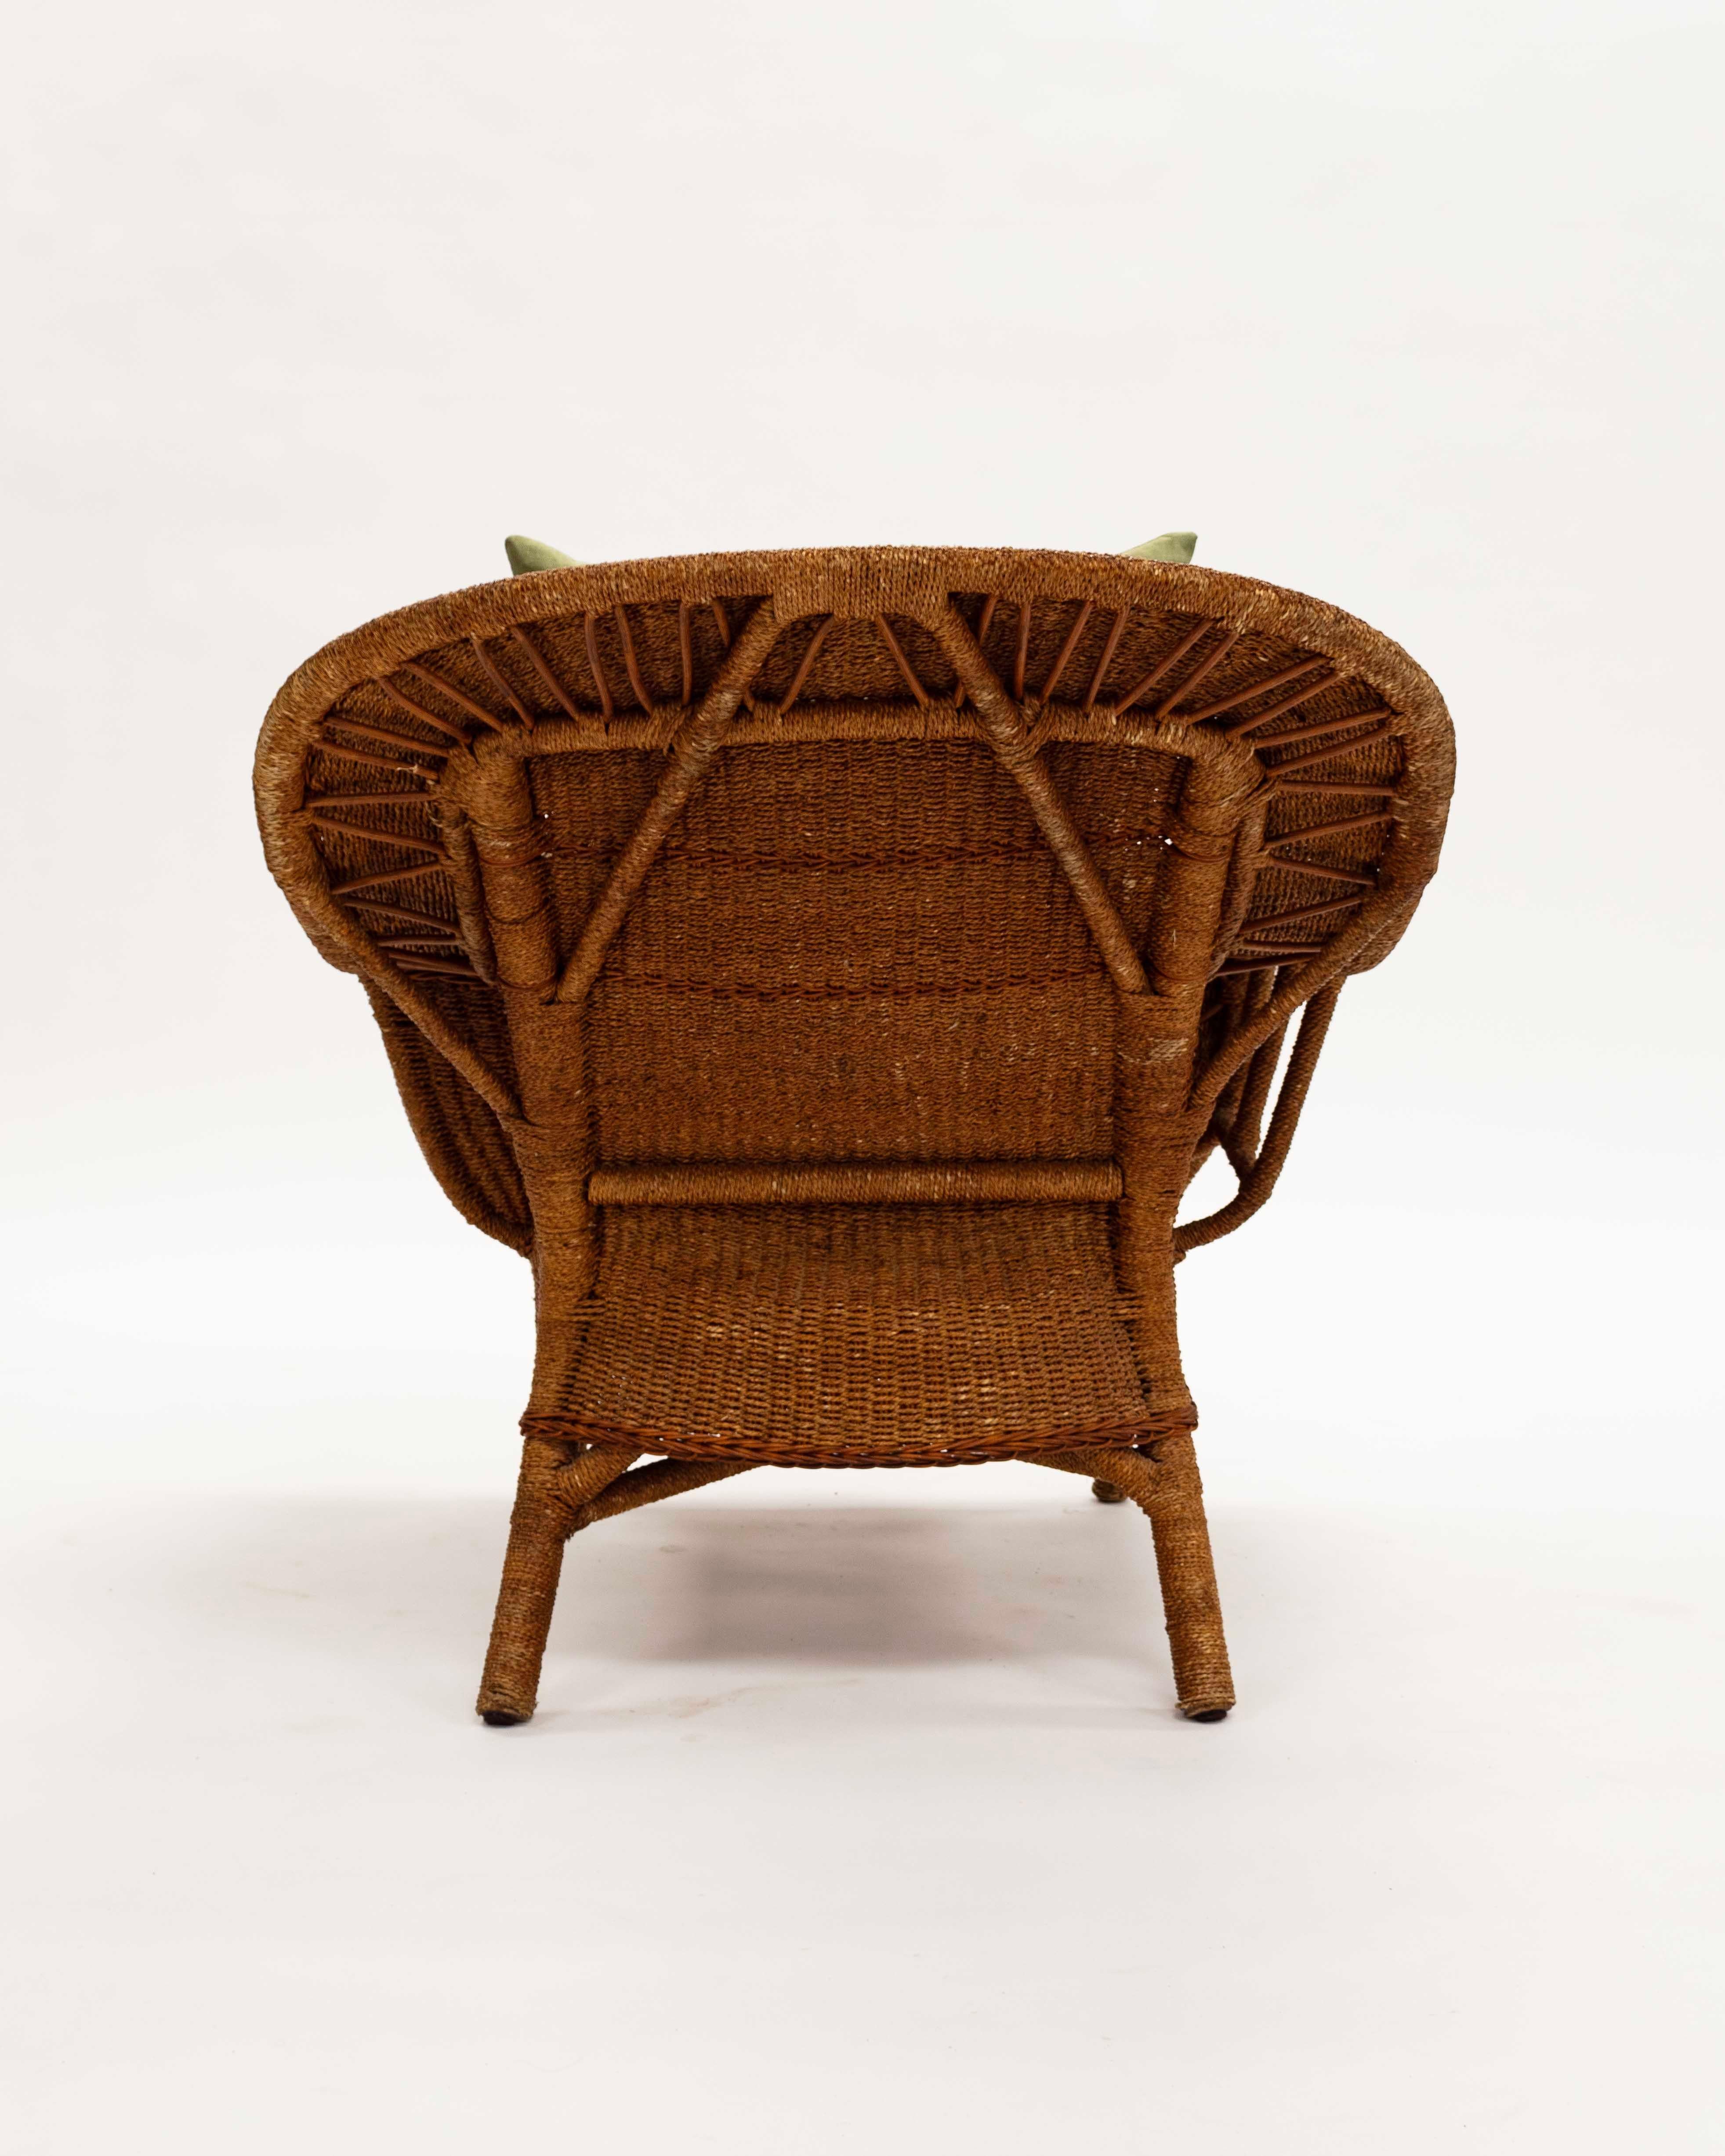 Woven Seagrass Large Chair and Ottoman For Sale 1